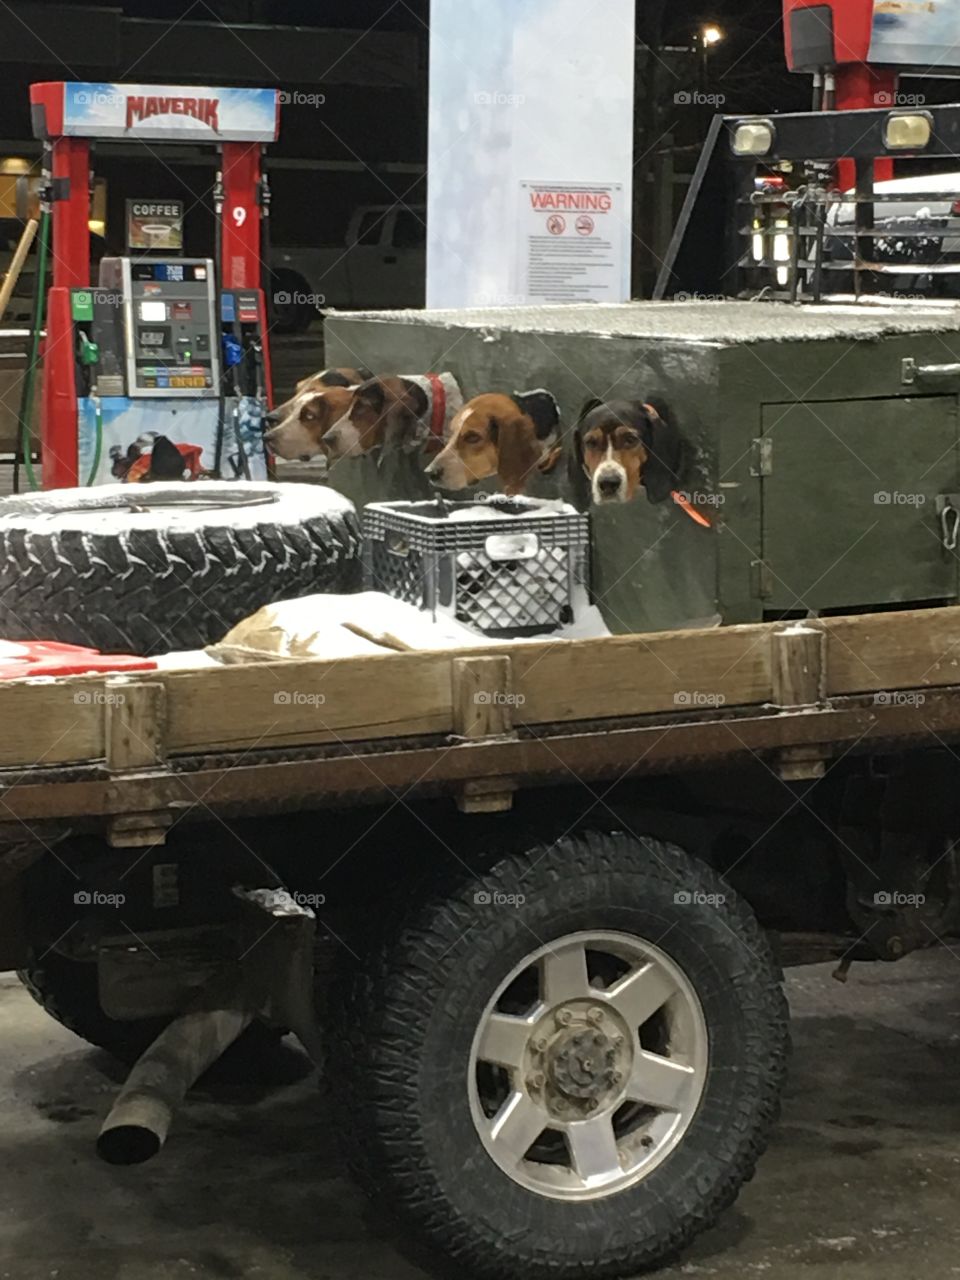 Just a doghouse on the truck with holes so the dogs can look out. And they do.